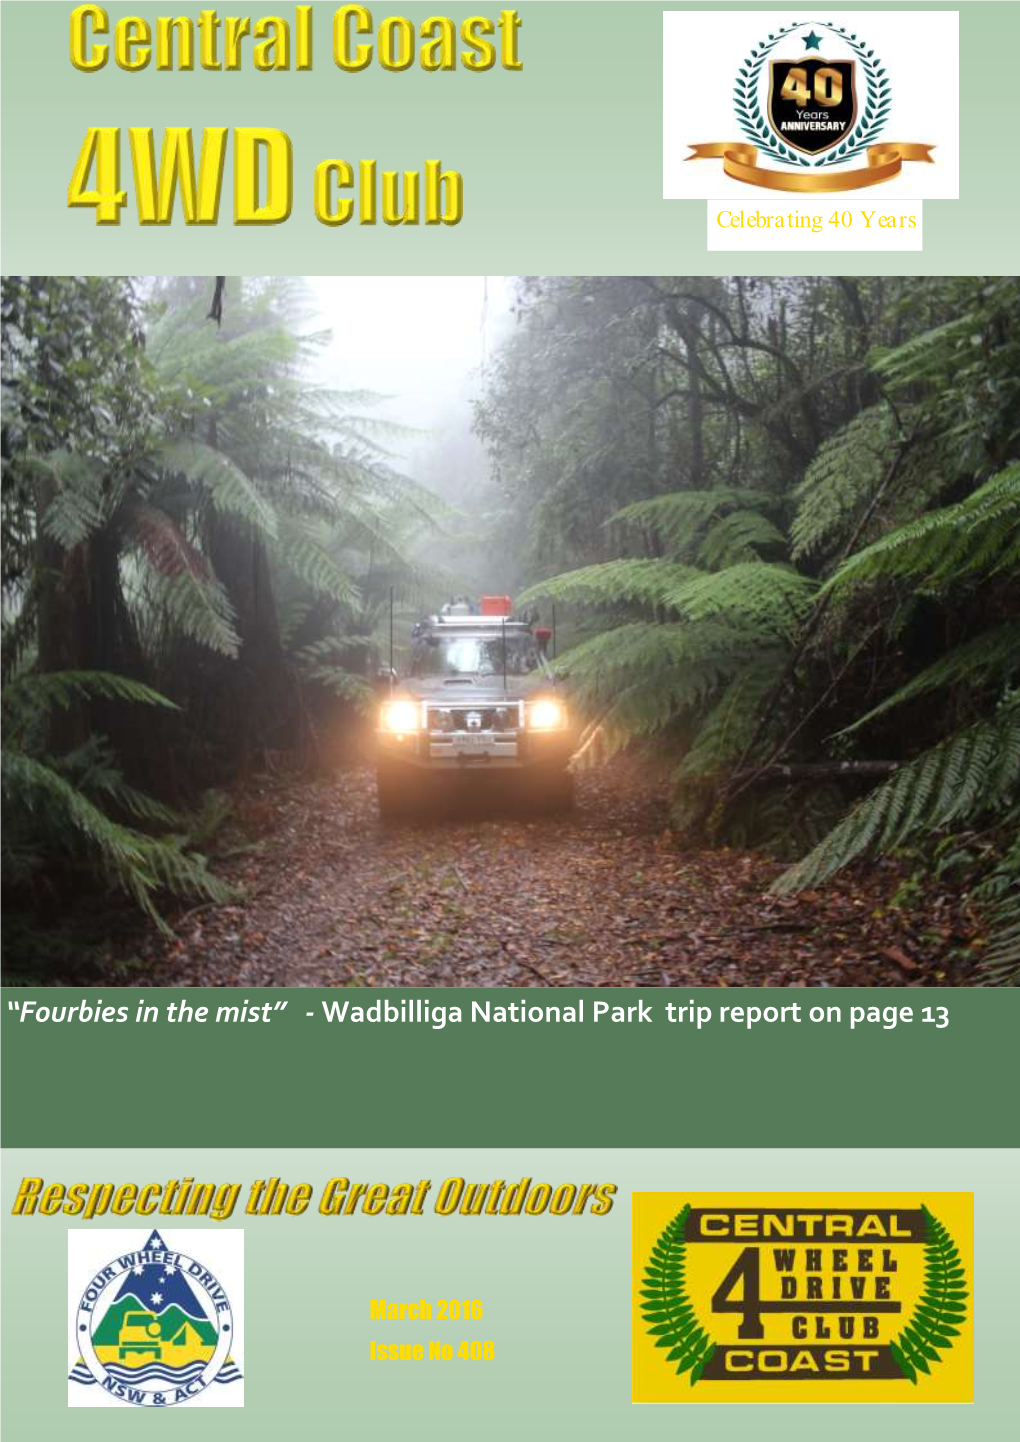 “Fourbies in the Mist” - Wadbilliga National Park Trip Report on Page 13